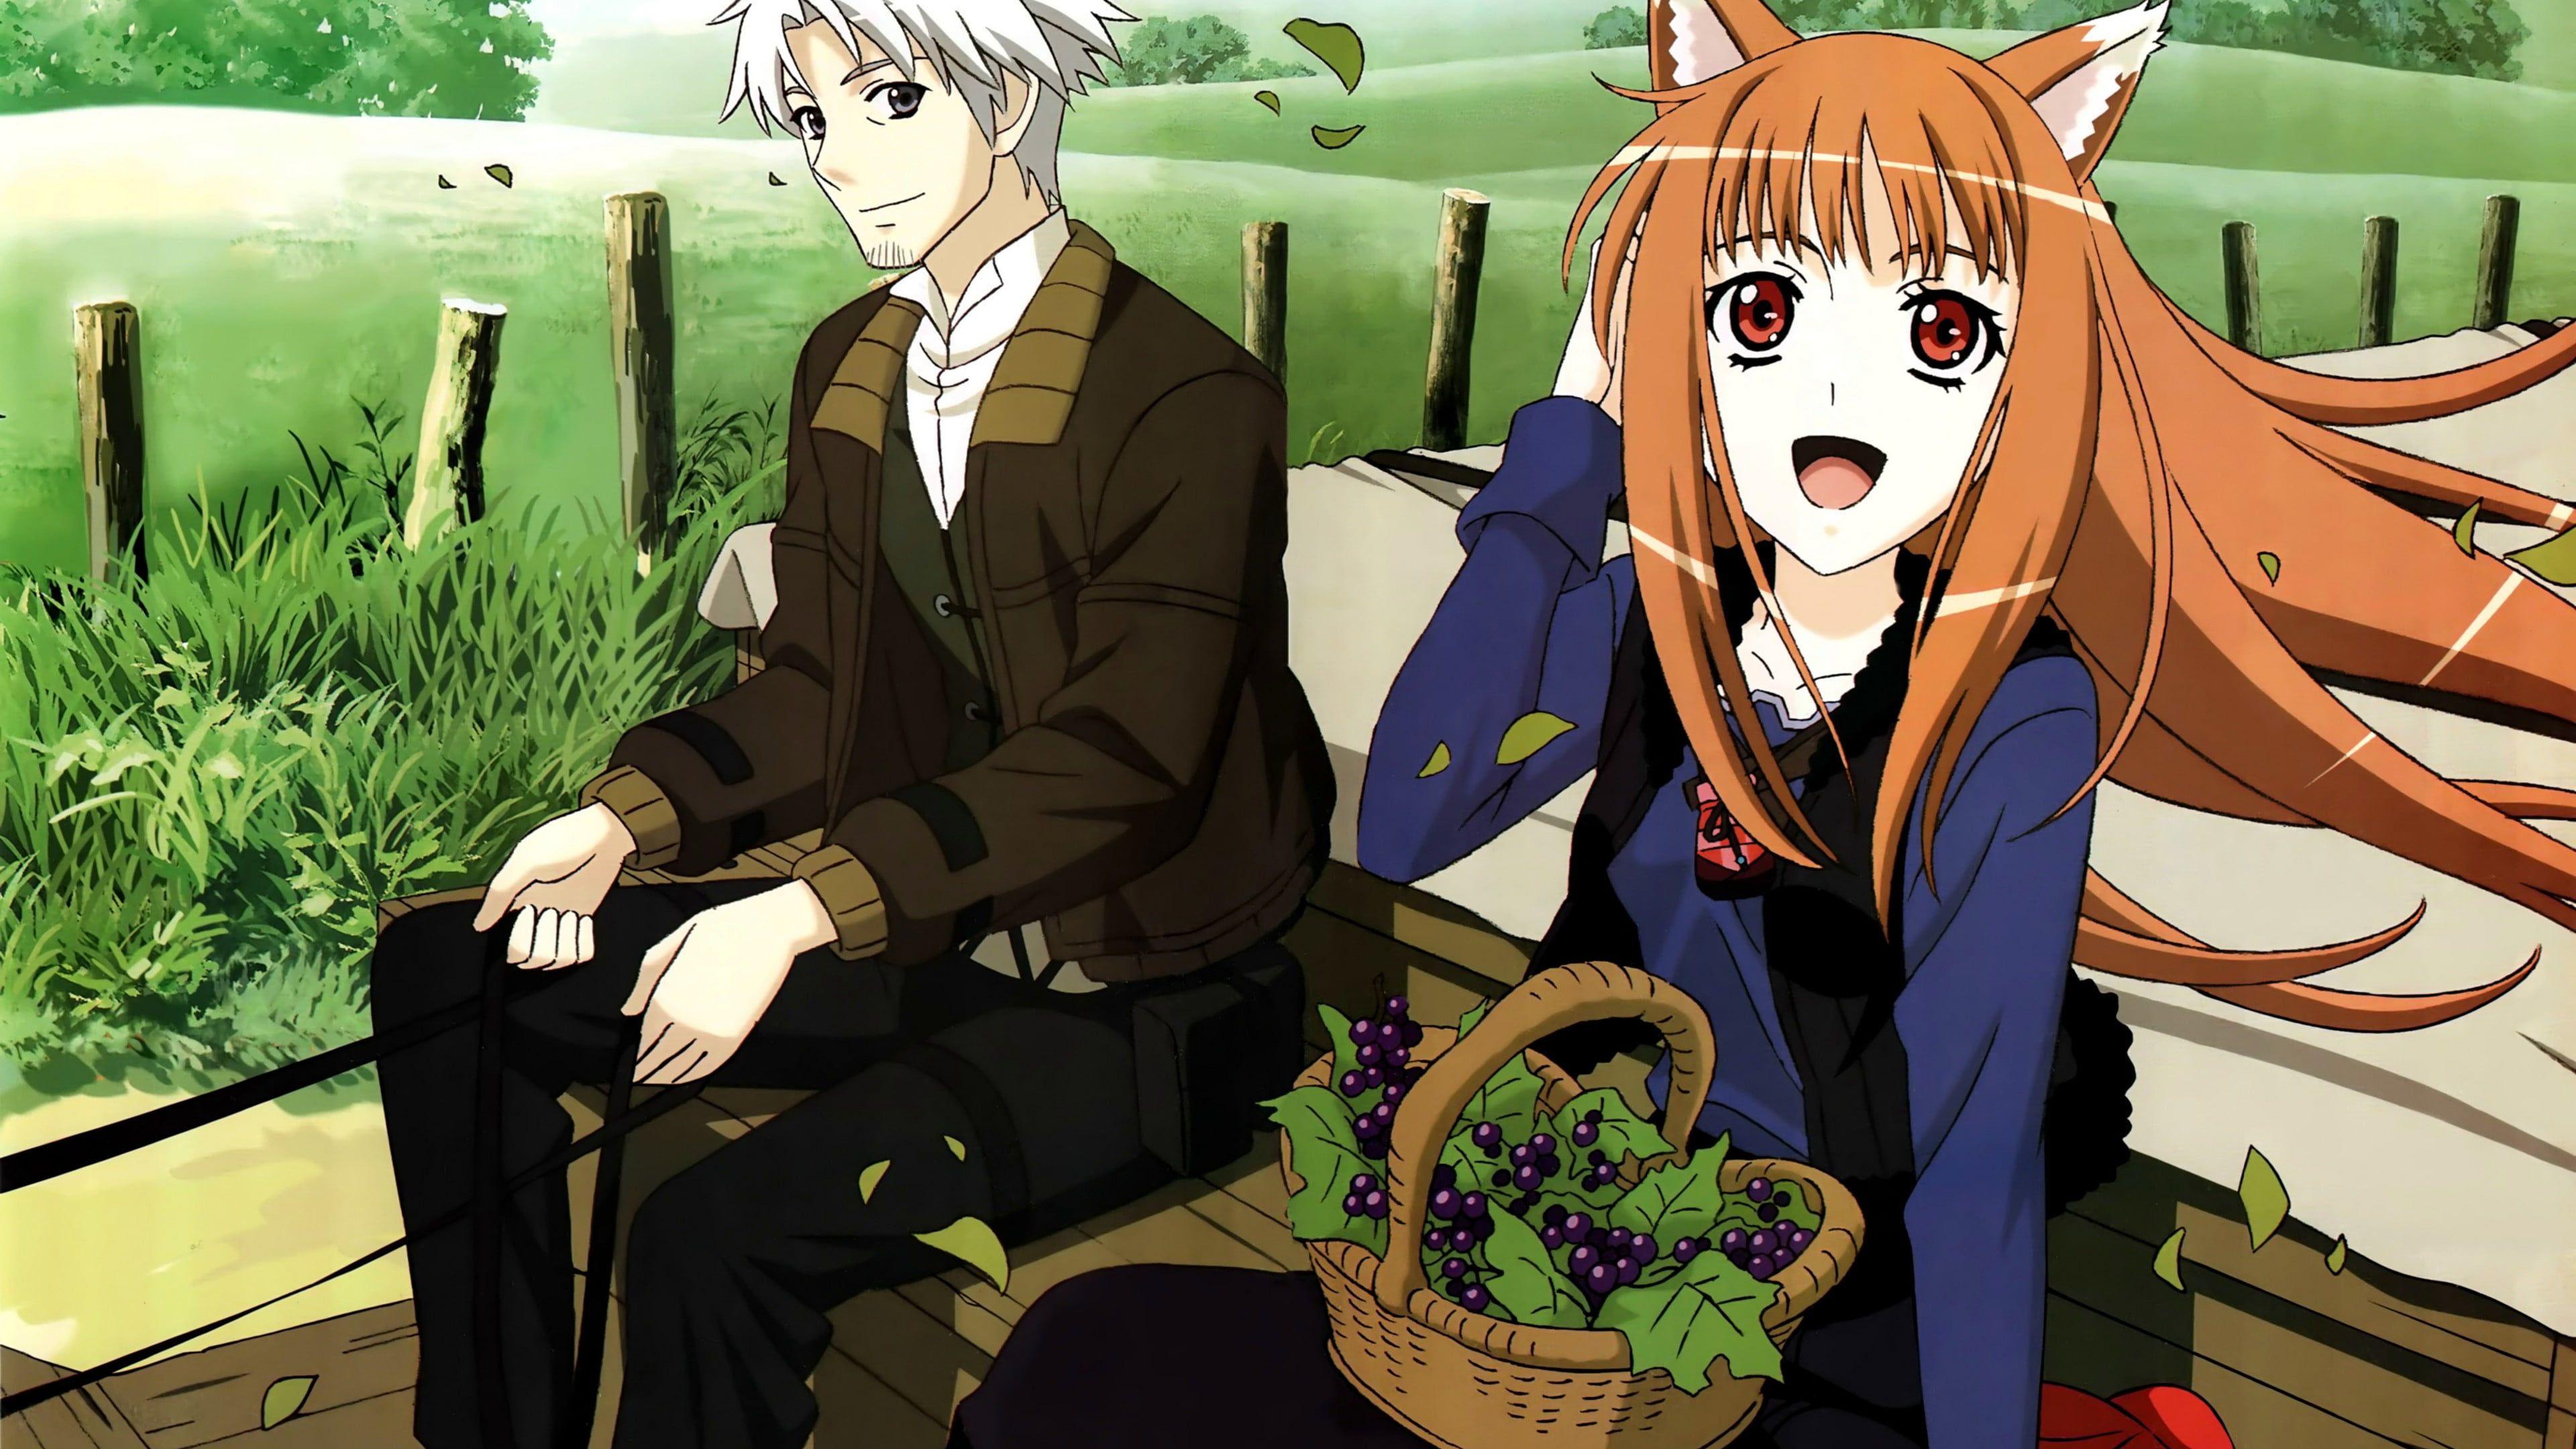 Girl with orange hair and fox ear with grapes on lap anime character